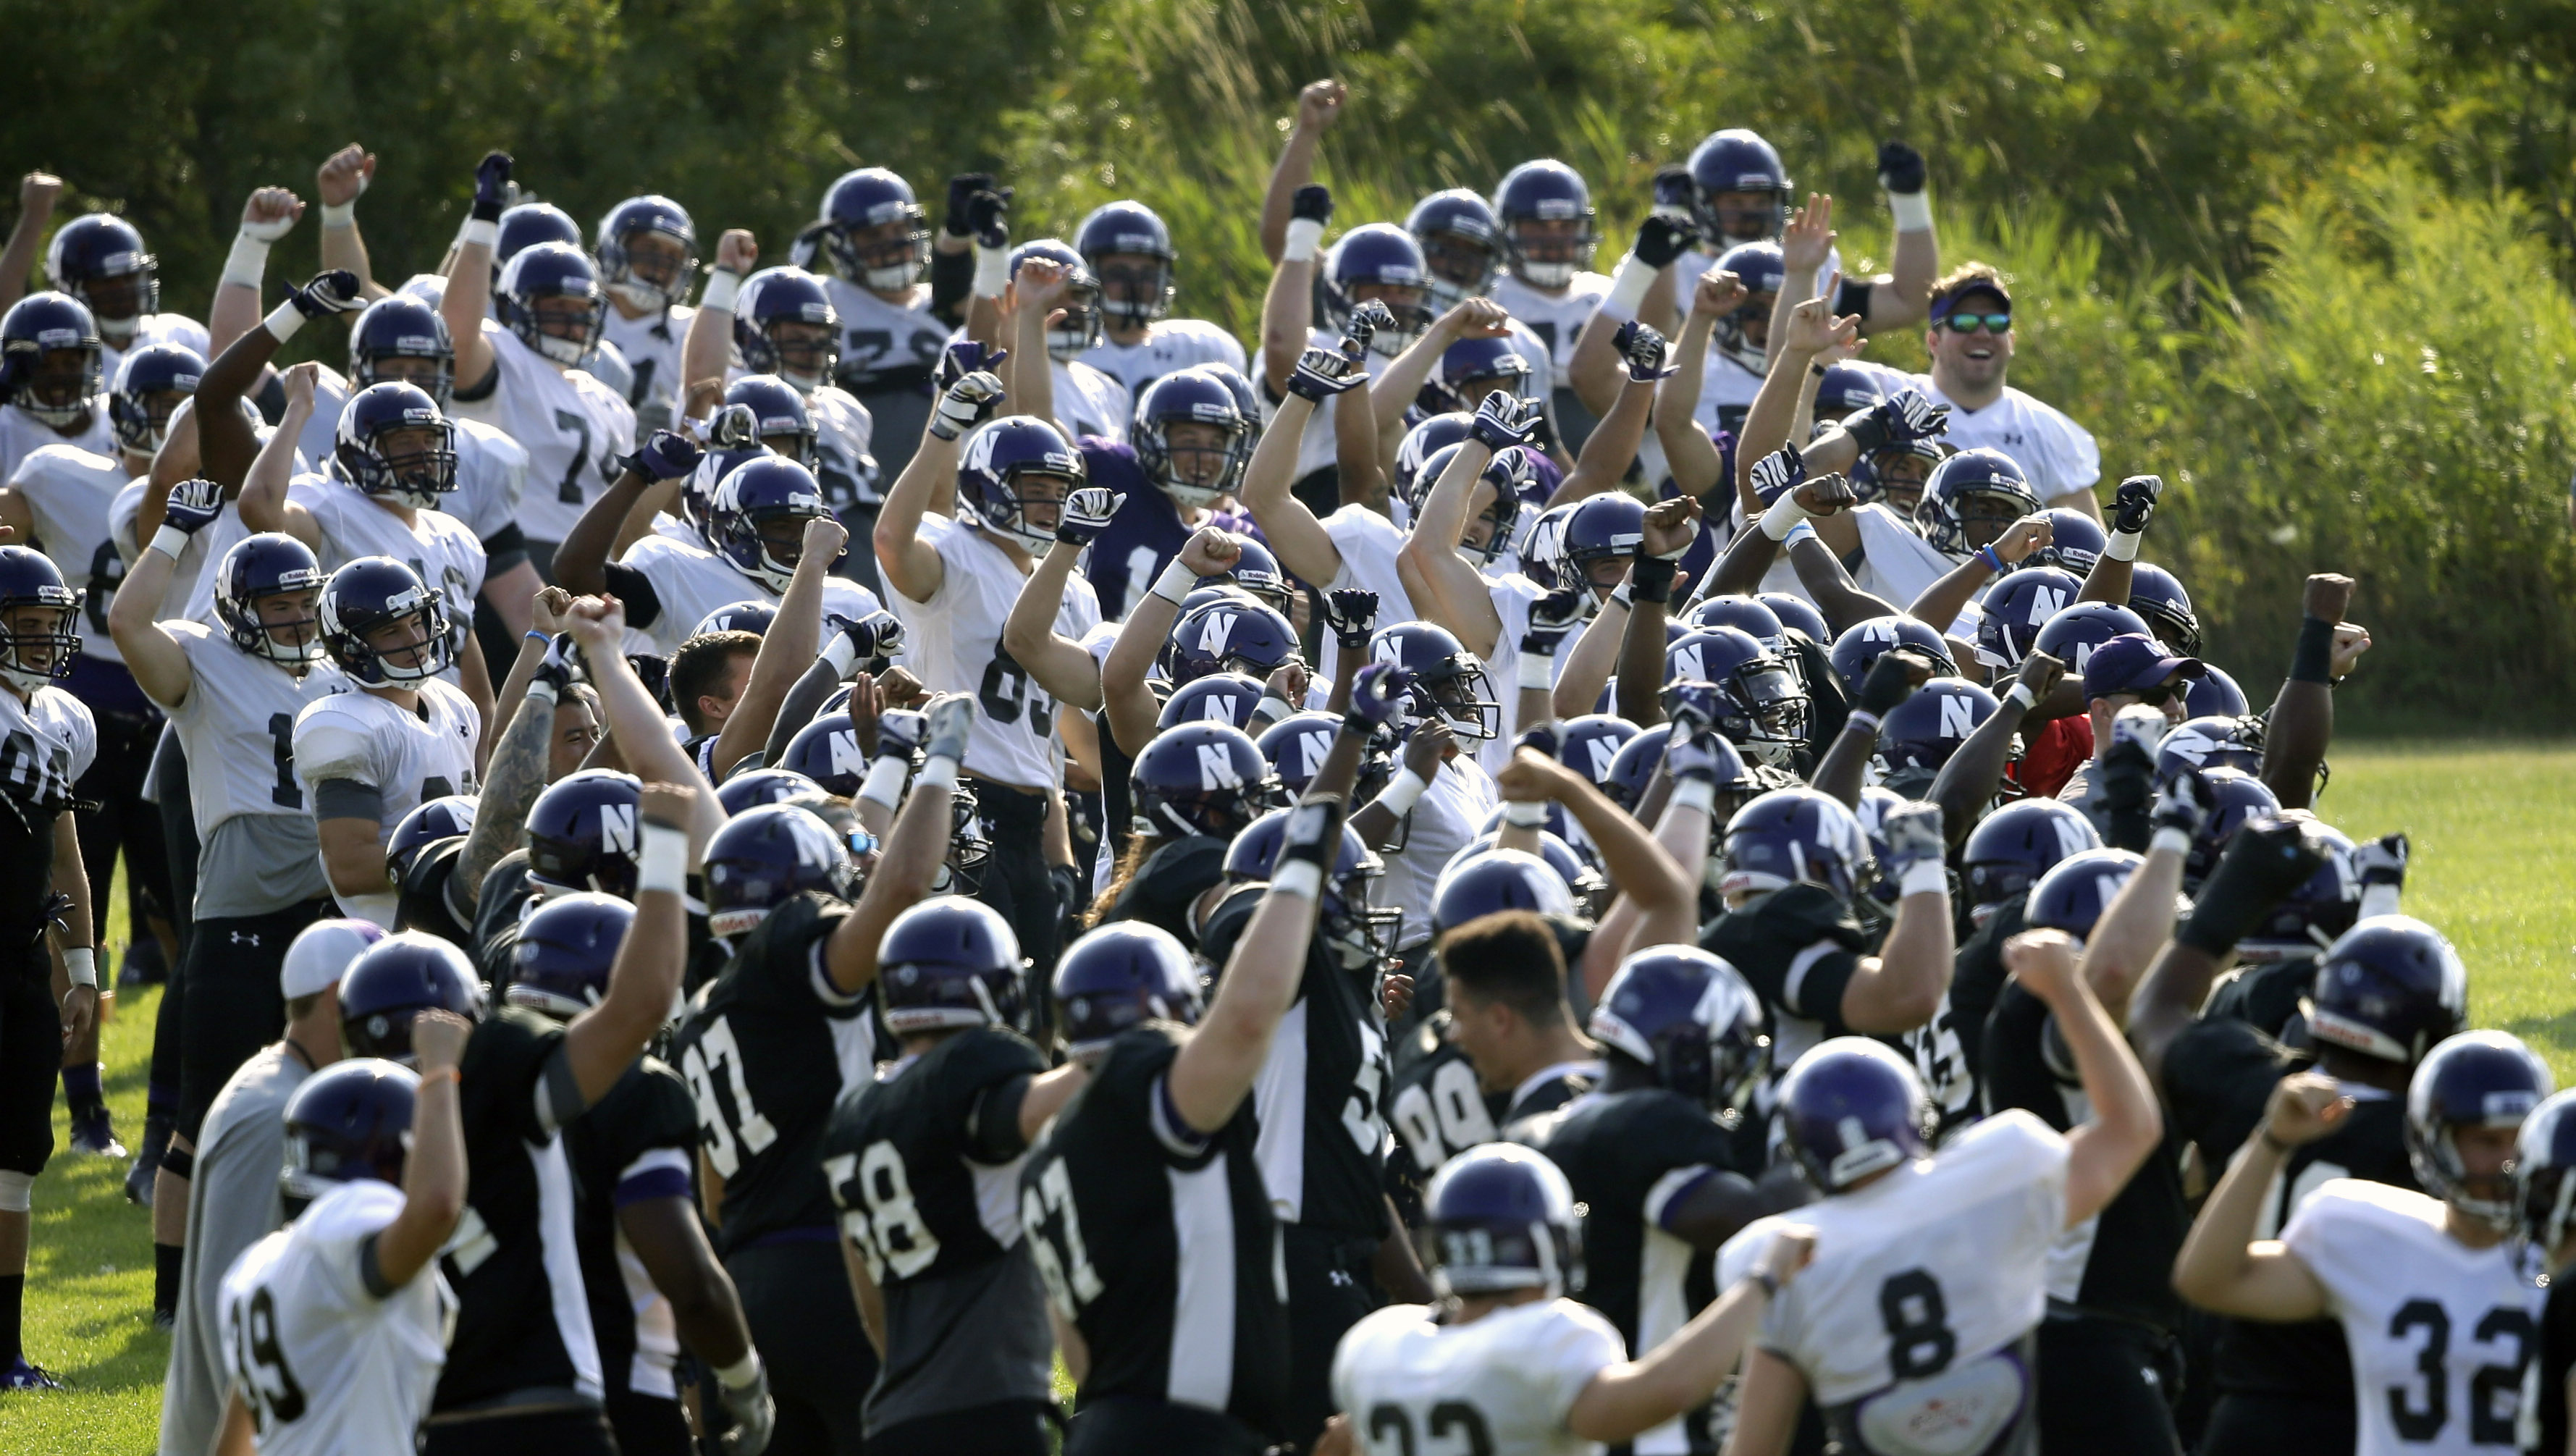 Northwestern football players gesture during practice at the University of Wisconsin-Parkside campus on Aug. 17, 2015, in Kenosha, Wi. (Jeffrey Phelps—AP)